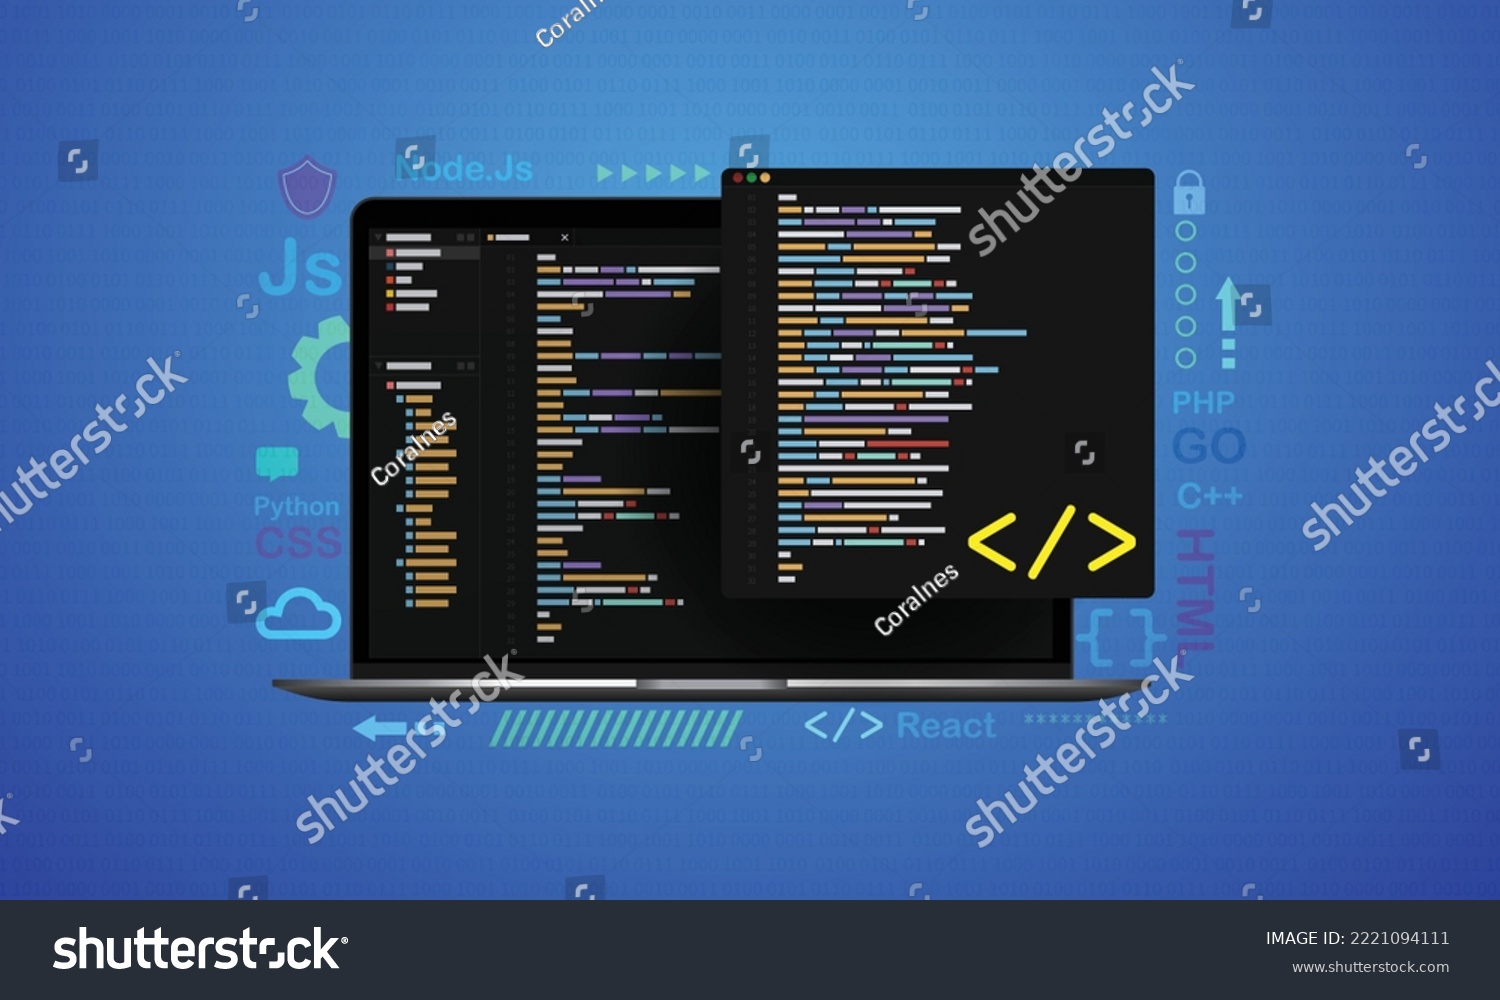 Concept of computer programming or developing software. Laptop computer with code on screen and design elements. Python, CSS, HTML, GO, PHP, React, C++ computer language.  #2221094111